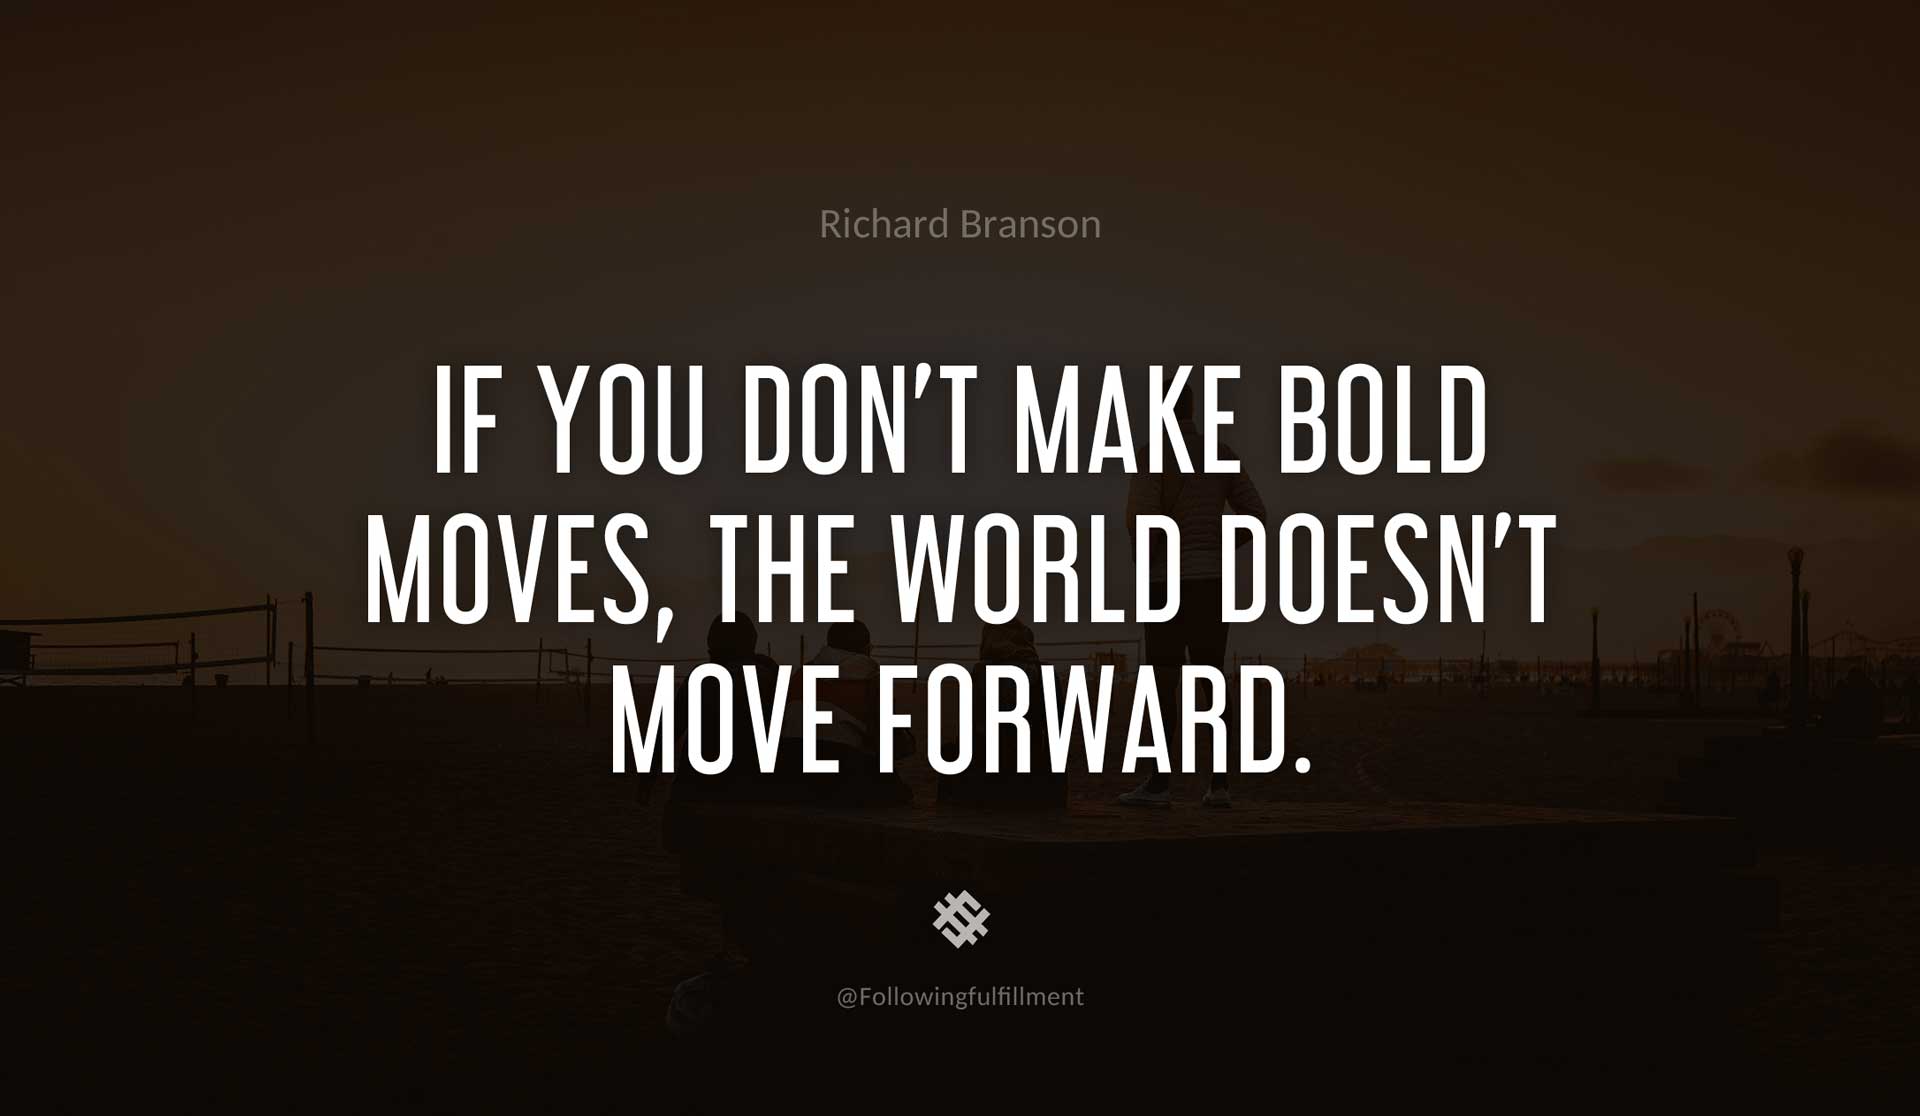 If-you-don't-make-bold-moves,-the-world-doesn't-move-forward.-RICHARD-BRANSON-Quote.jpg